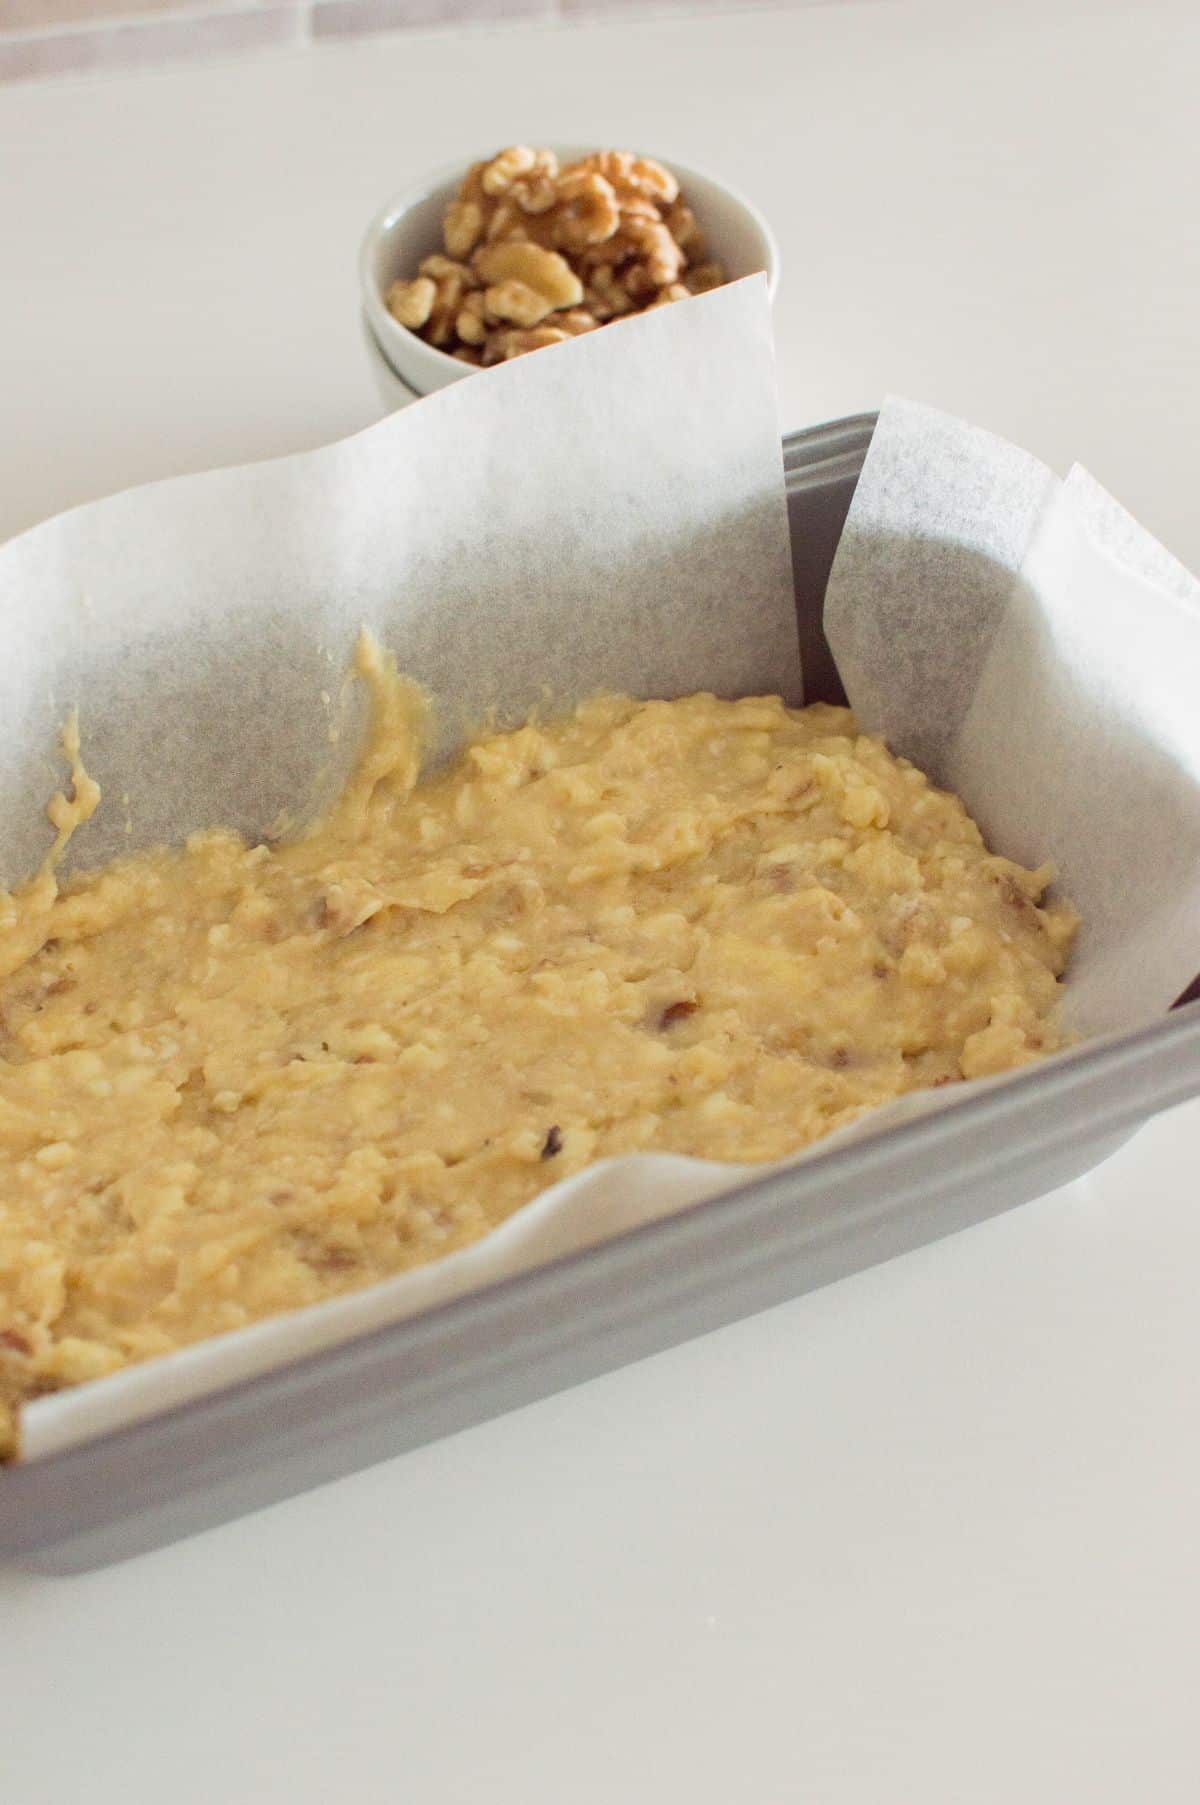 maple walnut bread batter on parchment paper in the loaf pan.